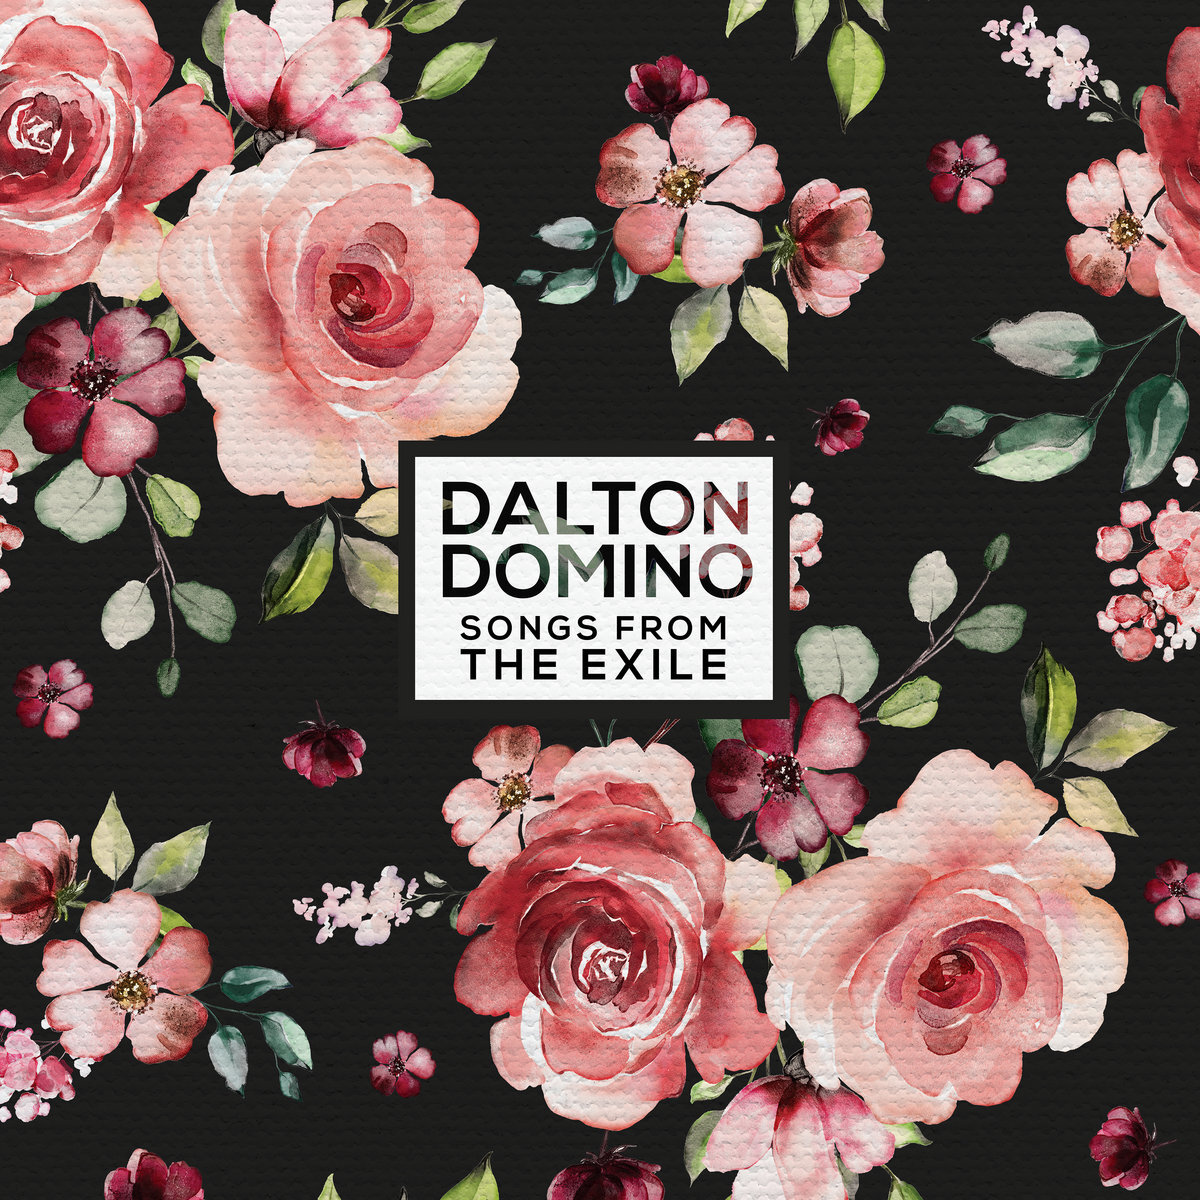 Songs From The Exile by Dalton Domino